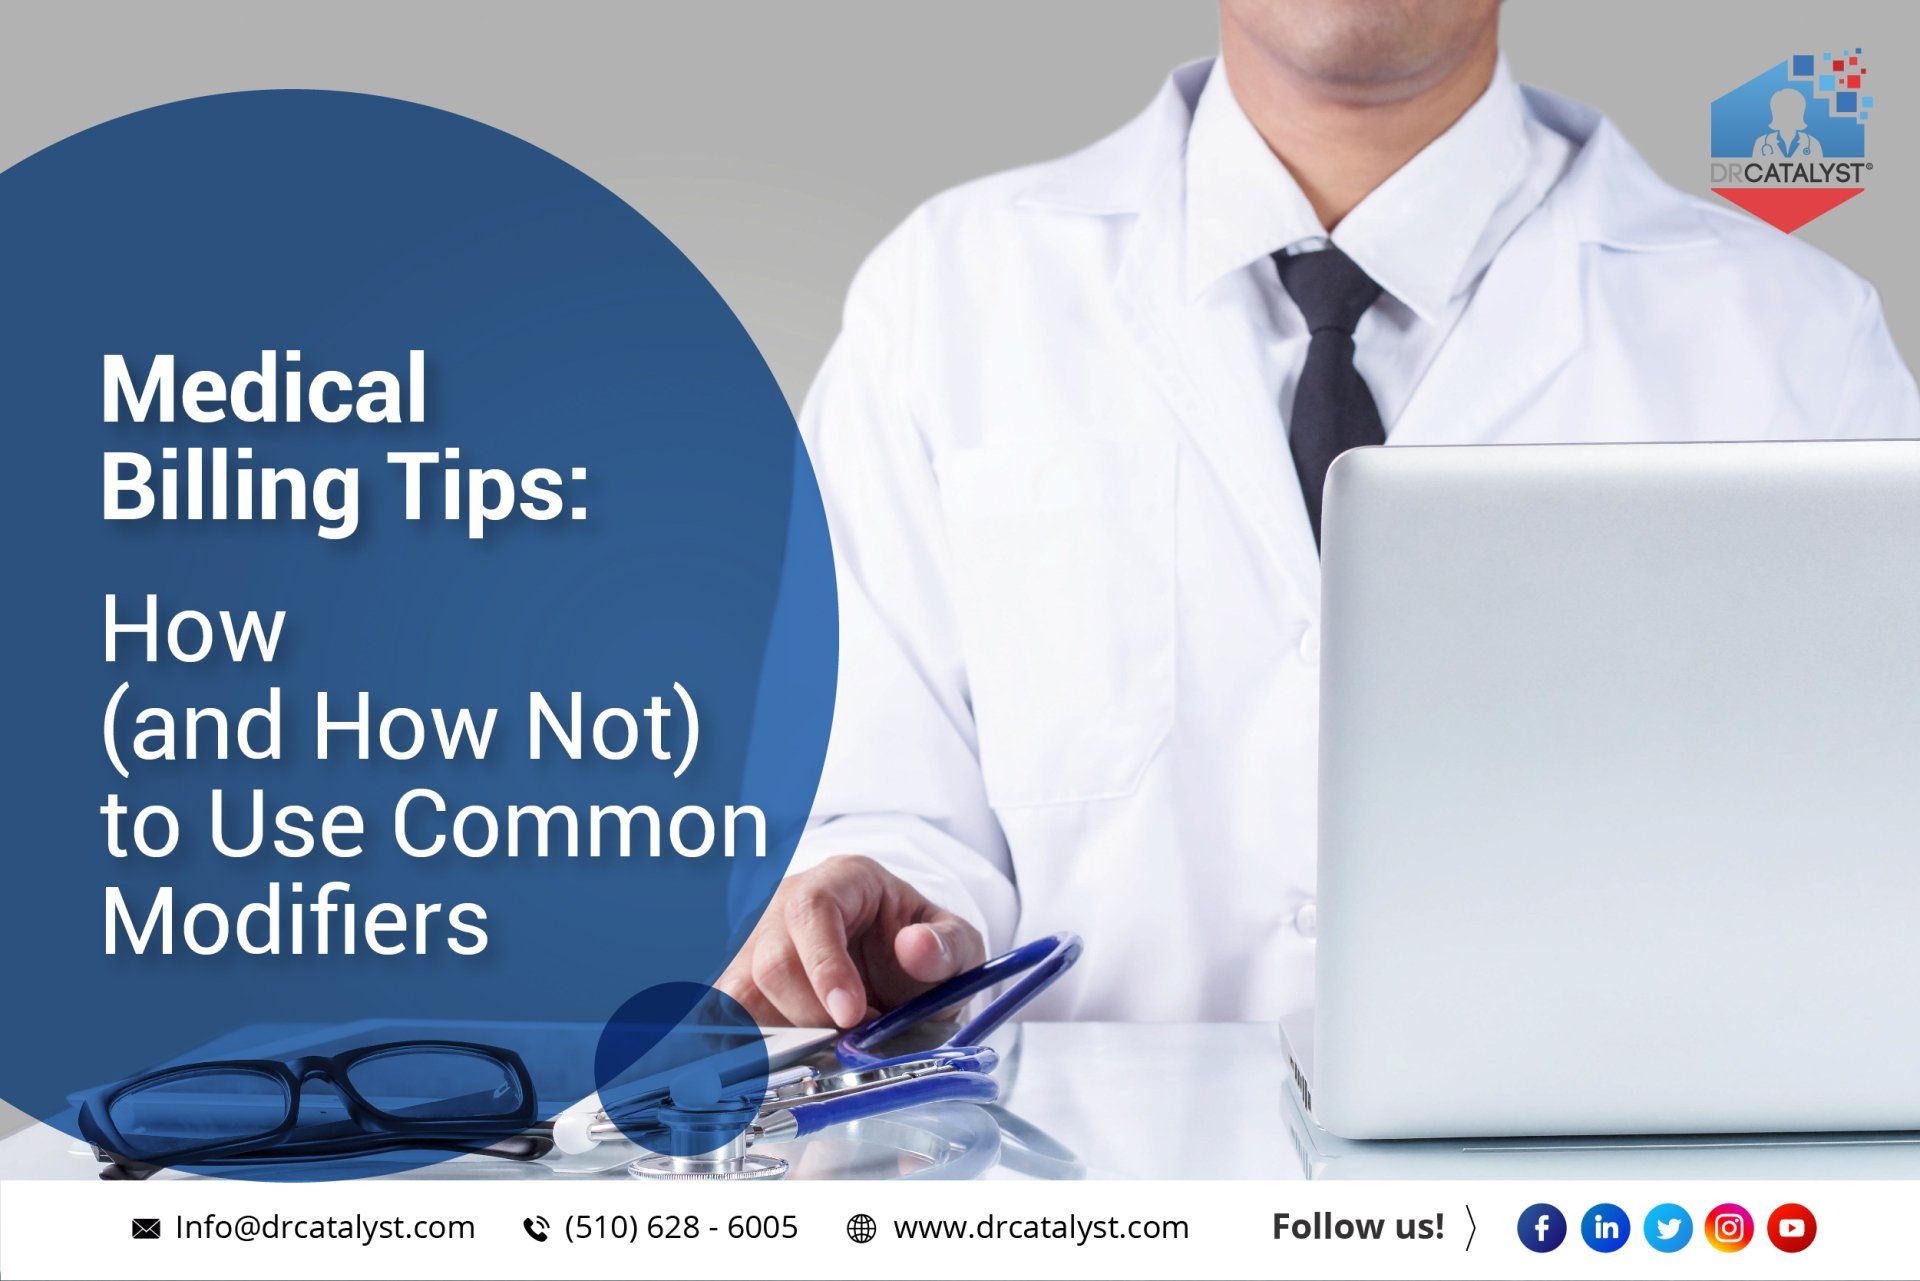 Medical Billing Tips How (and How Not) to Use Common Modifier